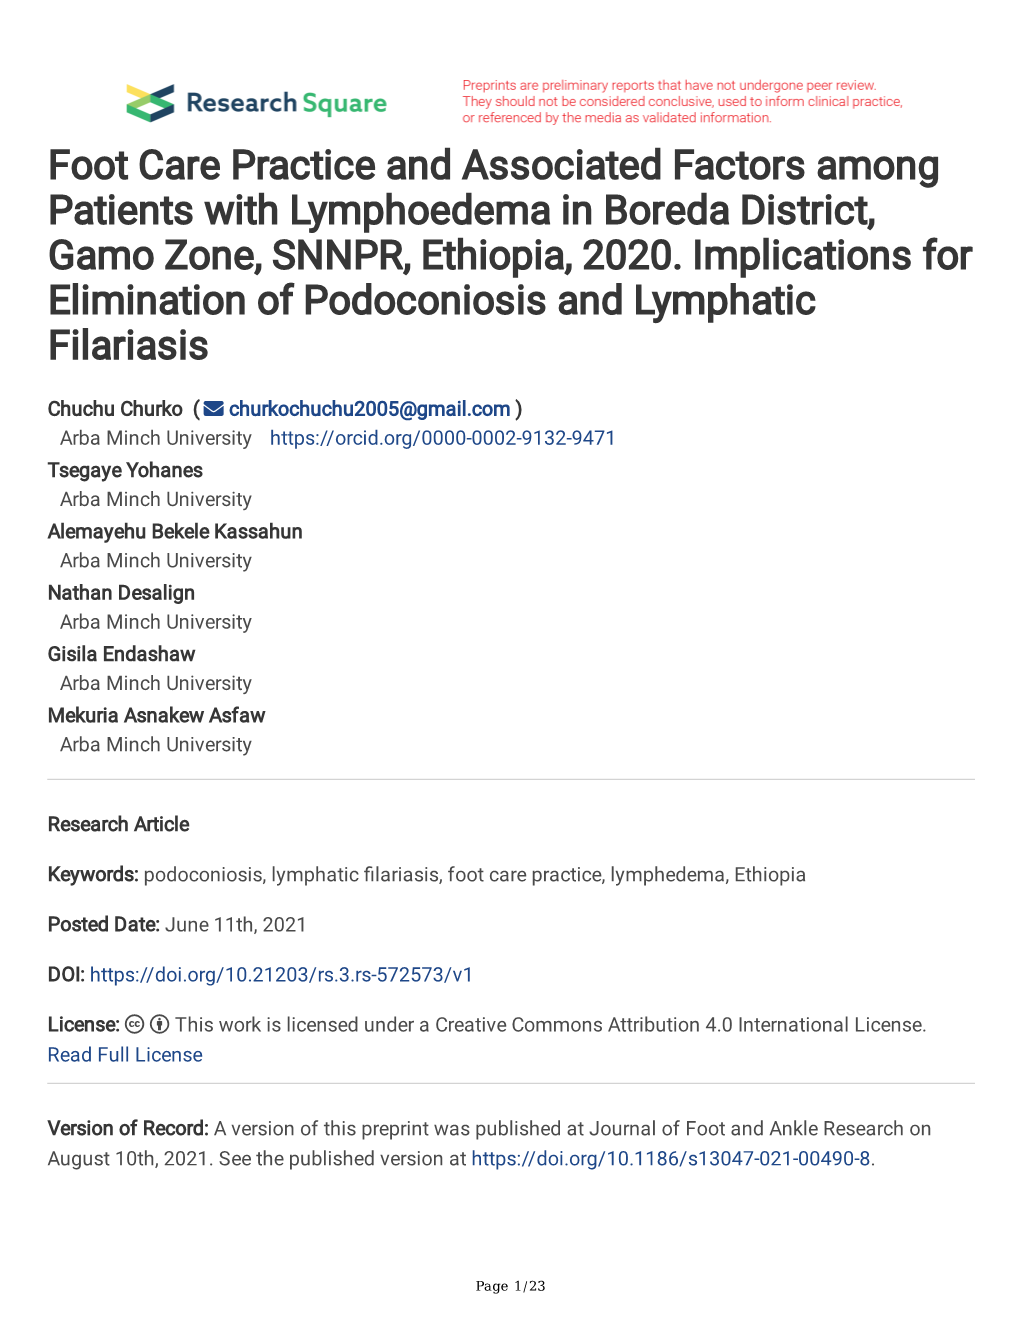 Foot Care Practice and Associated Factors Among Patients with Lymphoedema in Boreda District, Gamo Zone, SNNPR, Ethiopia, 2020